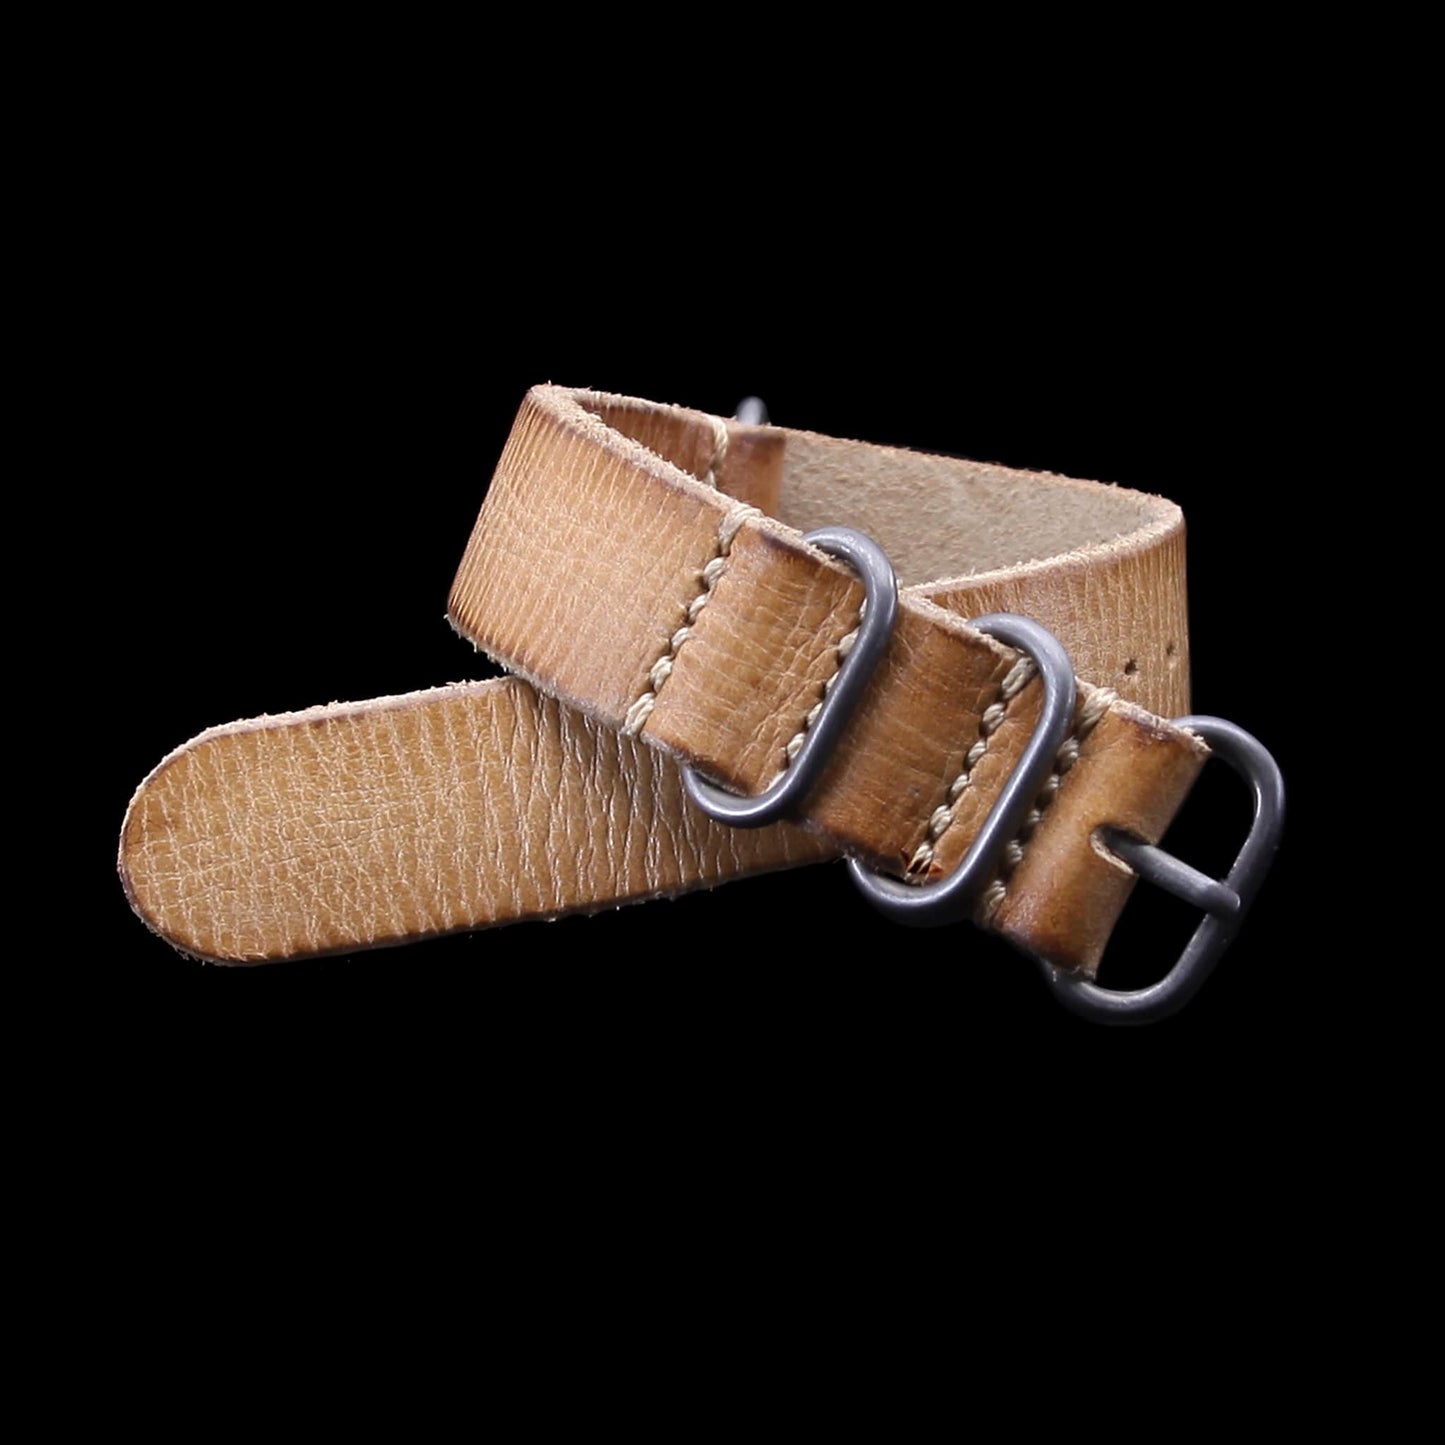 Leather Watch Strap, 4-Ring Distressed SEQ101 | Full Grain Italian Veg Tanned Leather | Cozy Handmade